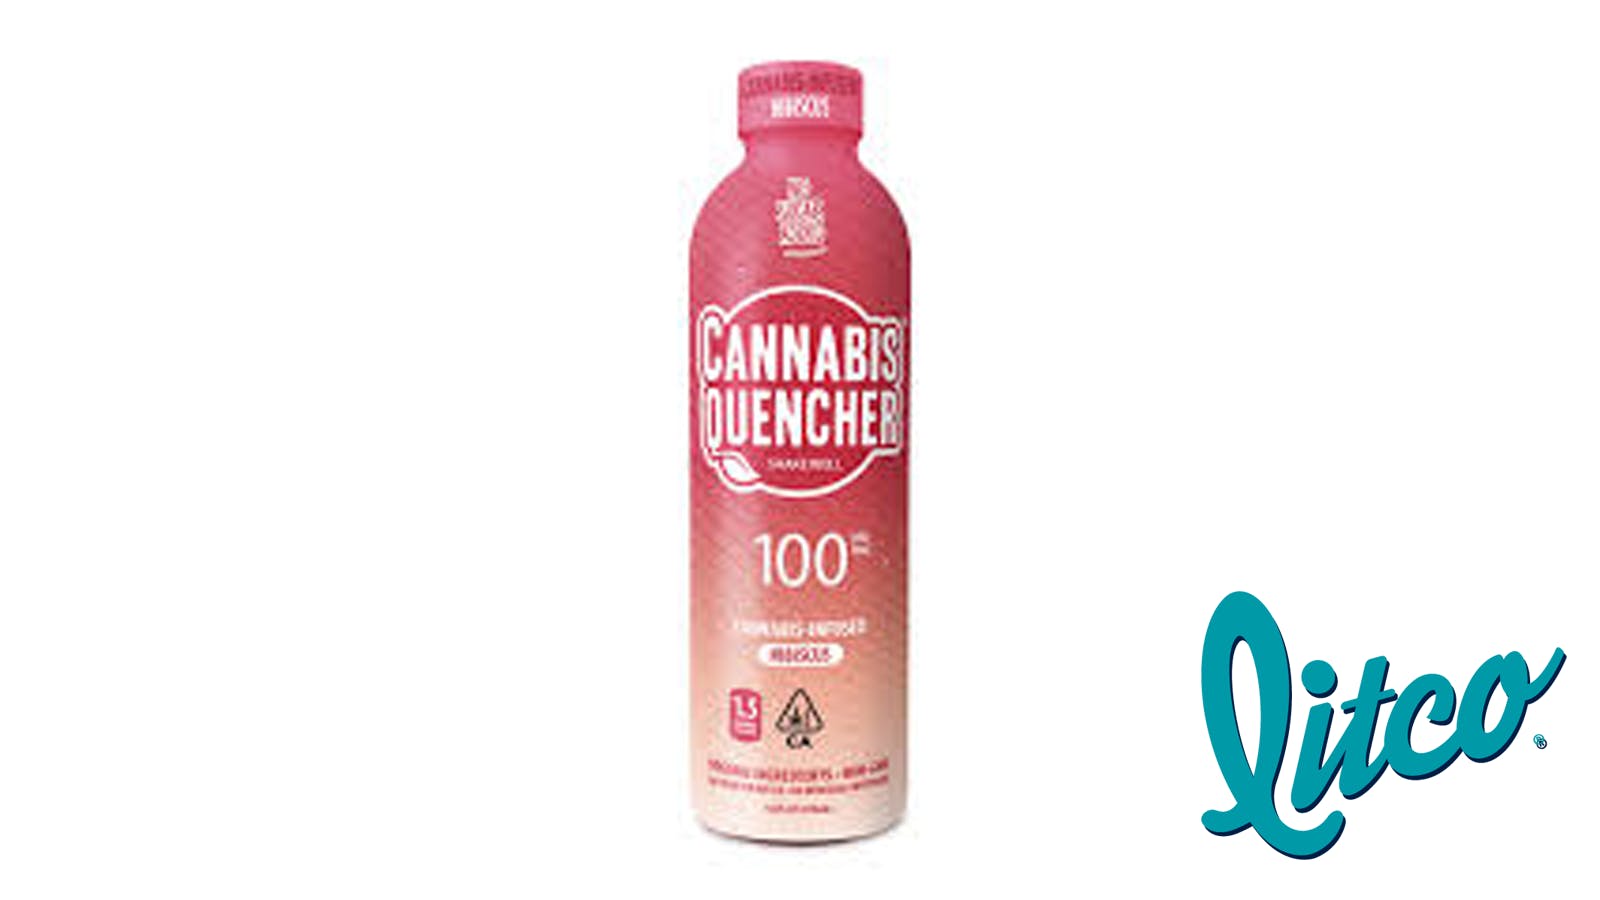 edible-cannabis-quencher-hibiscus-drink-100mg